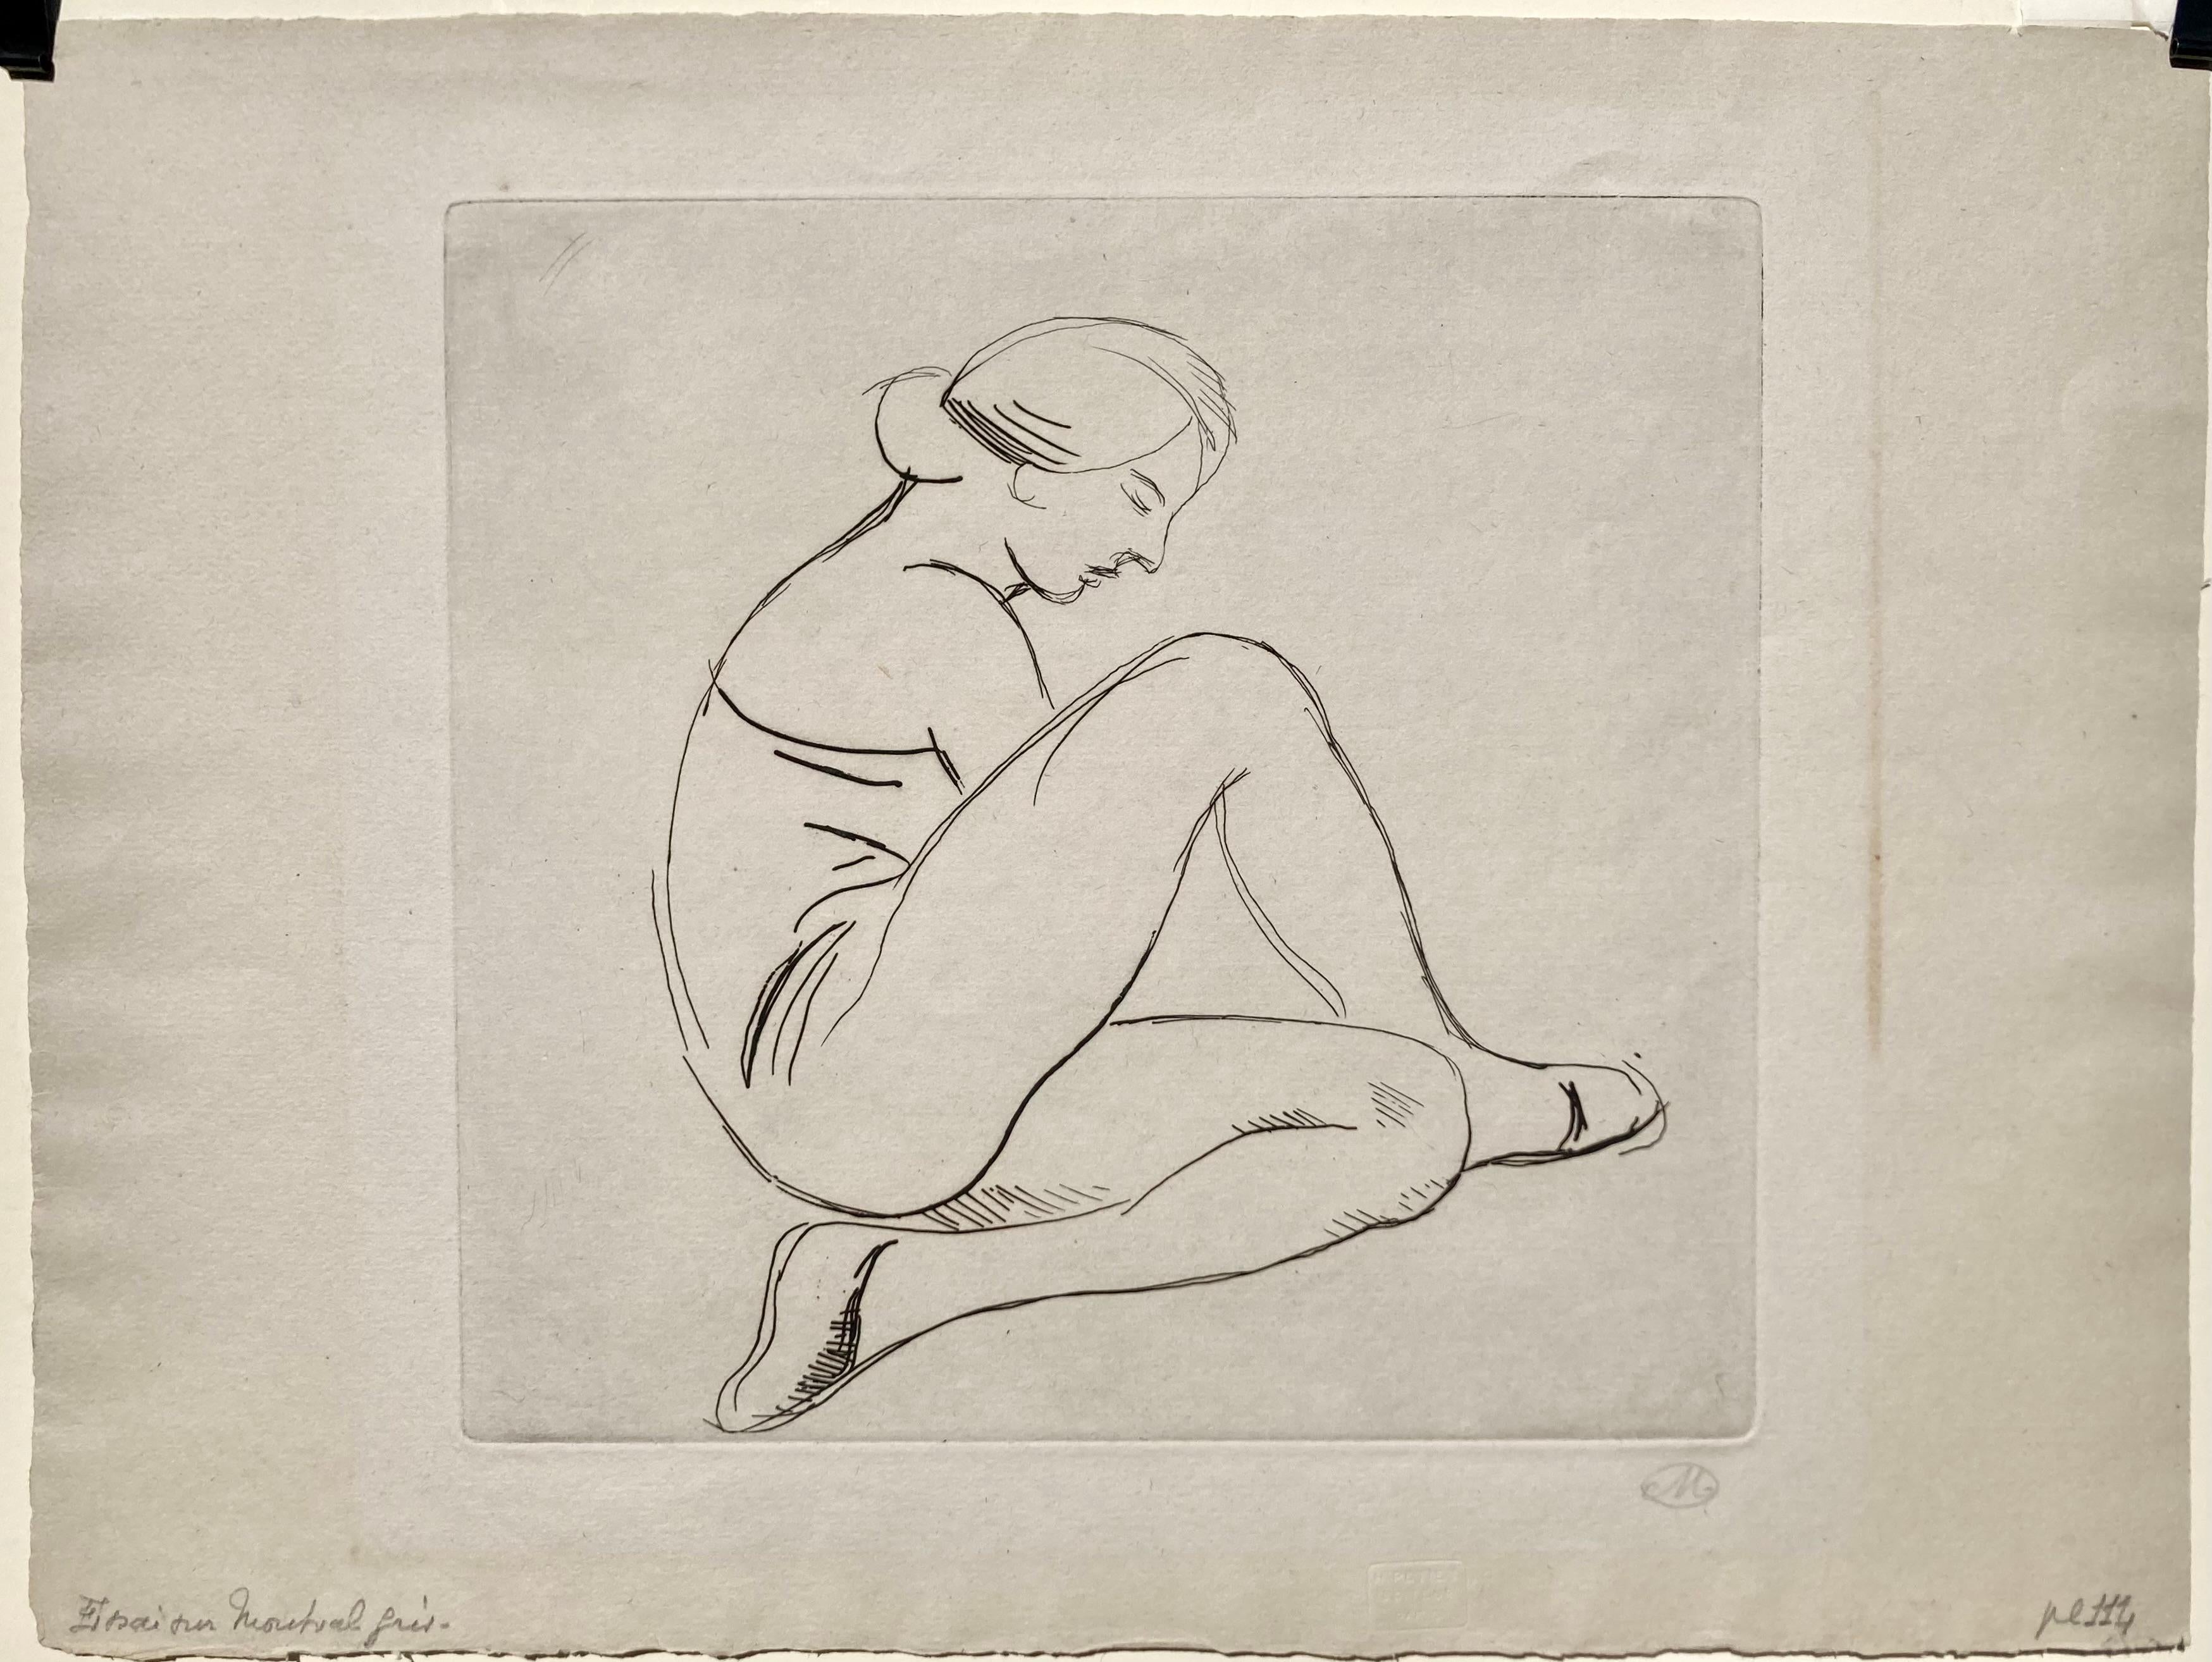 ARISTIDE MAILLOL (1861-1944)

FEMME ASSISE /
(WOMAN SEATED IN PROFILE, RIGHT, ONE LEG BENT. ONE LEG RAISED), 1926 (Gueirn 321)
Etching signed with “M” monogram in pencil. Image 9 x 9 ½”, full sheet 11 3/4” x 15 ¾”
Blind stamp of H. Petiet Editeur,